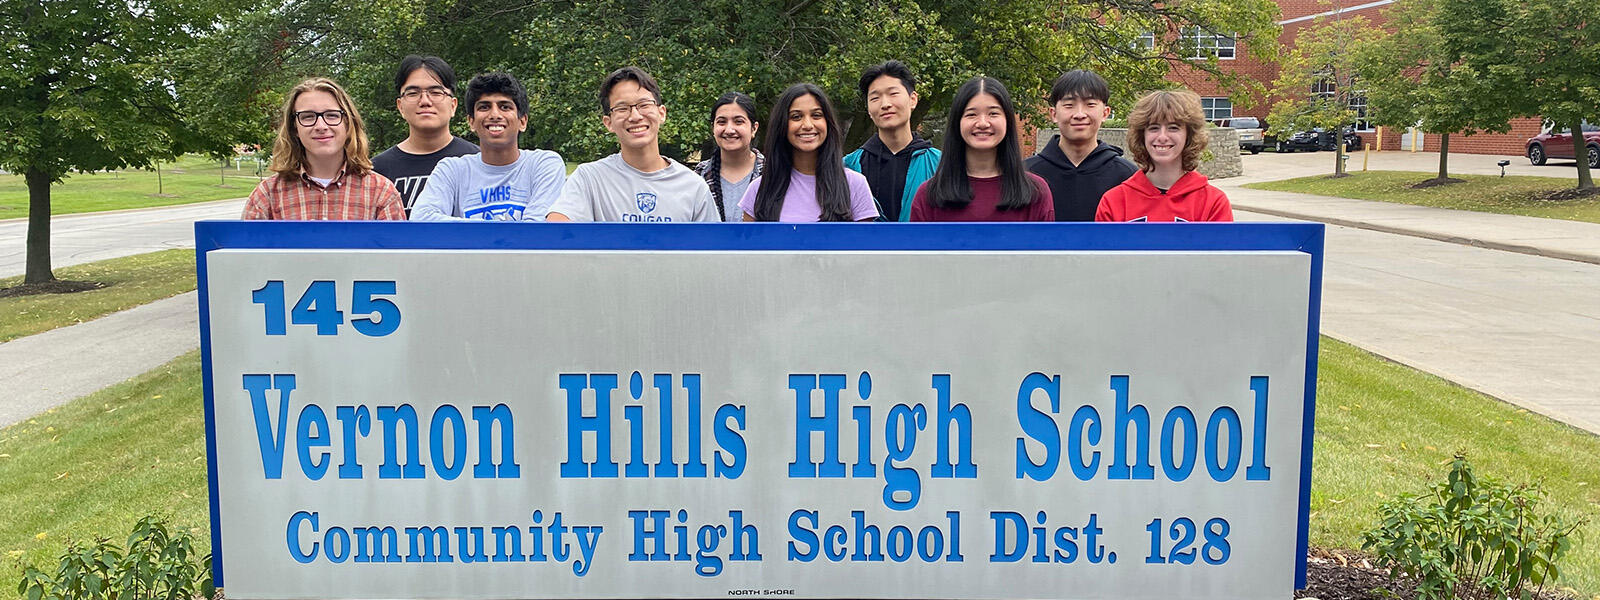 Photo of 10 VHHS students who earned National Merit Semifinalist status